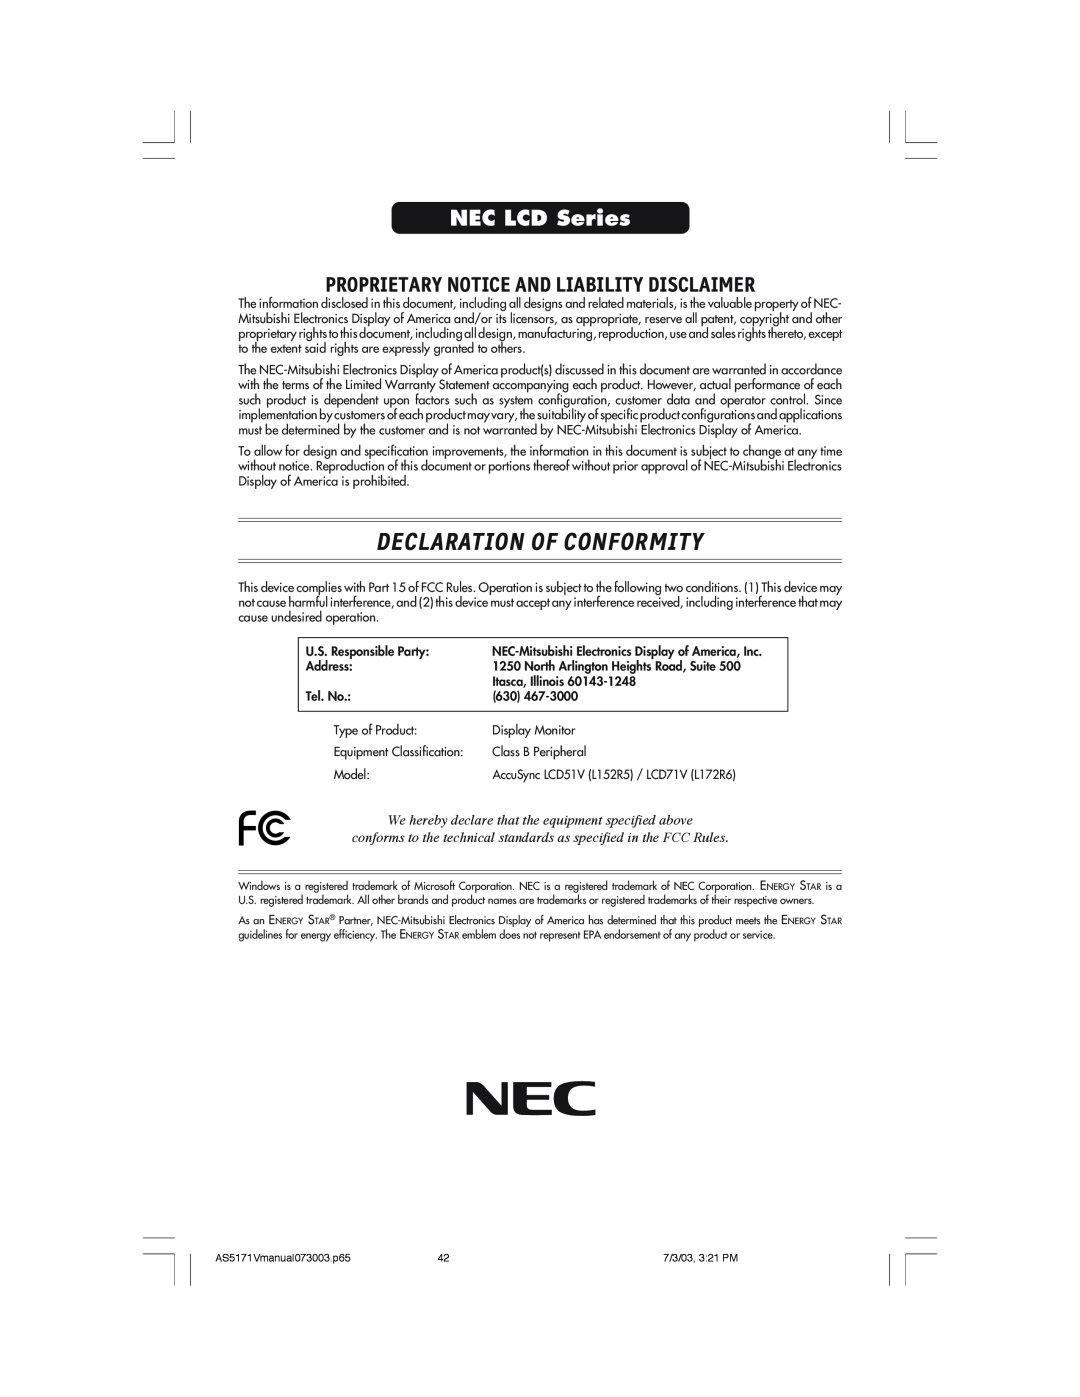 NEC LCD71V manual Declaration Of Conformity, NEC LCD Series, Proprietary Notice And Liability Disclaimer 